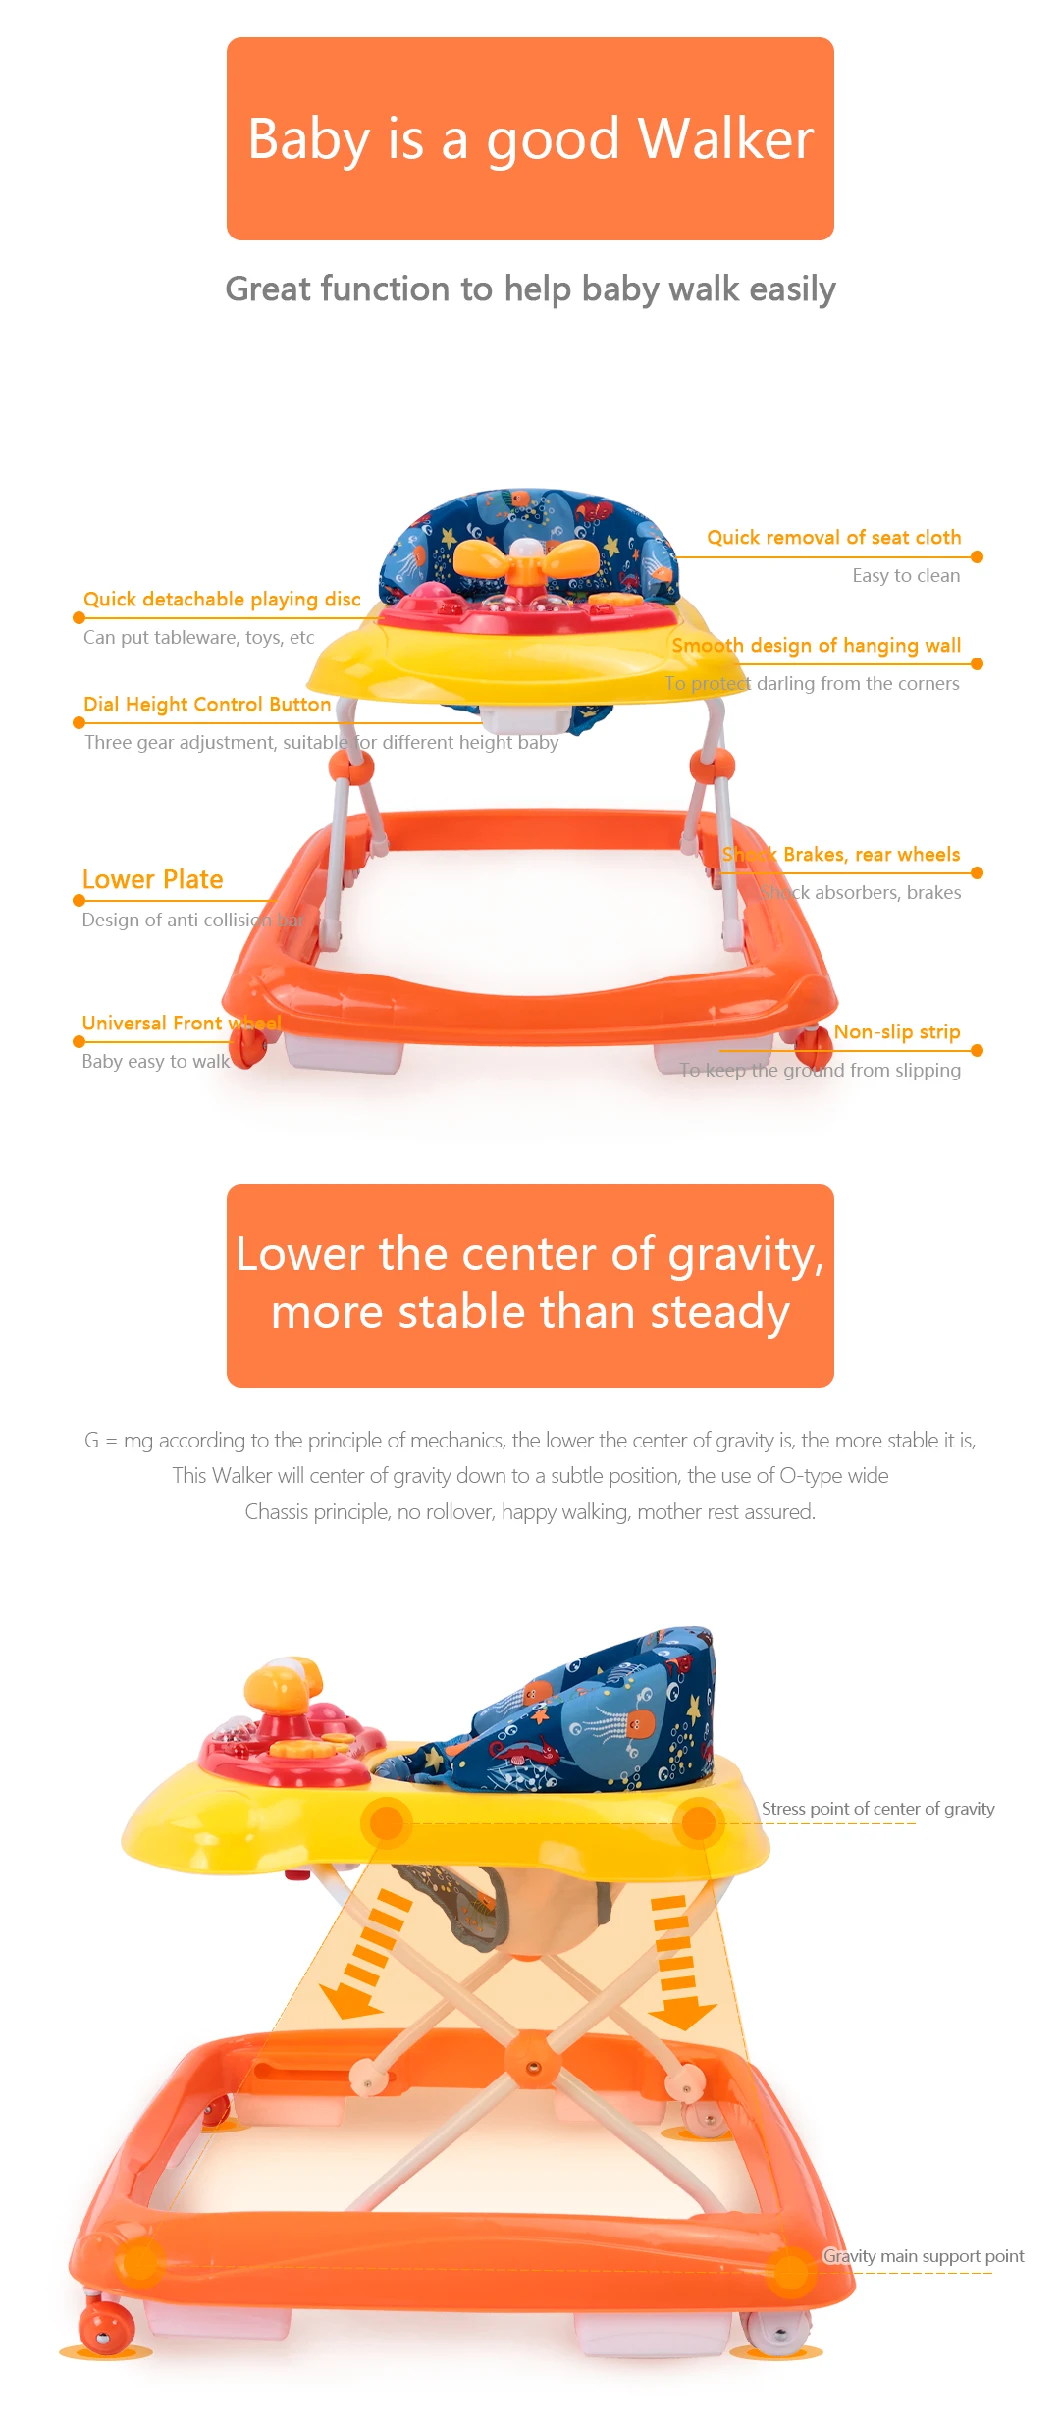 Safest Lightweight Plastic Foldable Plain Baby Walker with Excellent Materials